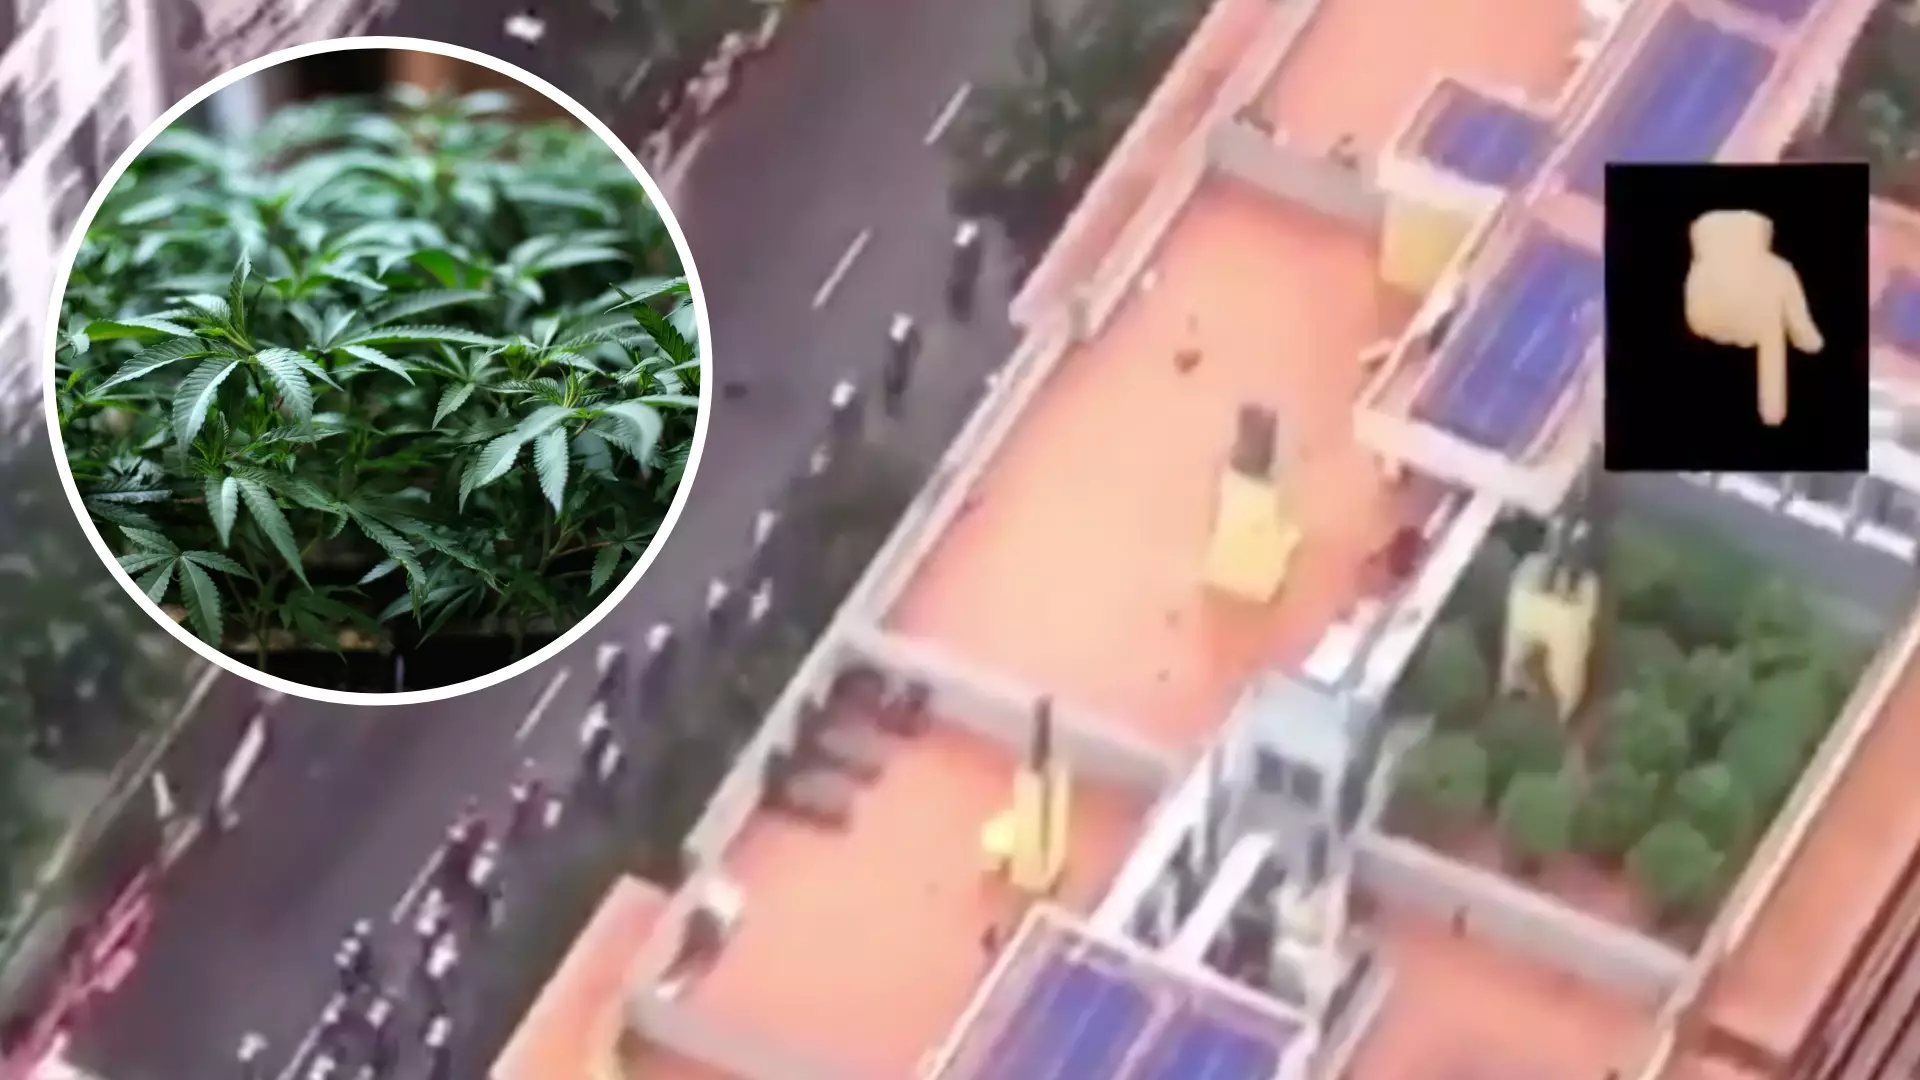 Helicopter For Spain's Vuelta A Espana Captured TV Footage Of A Rooftop Weed Farm